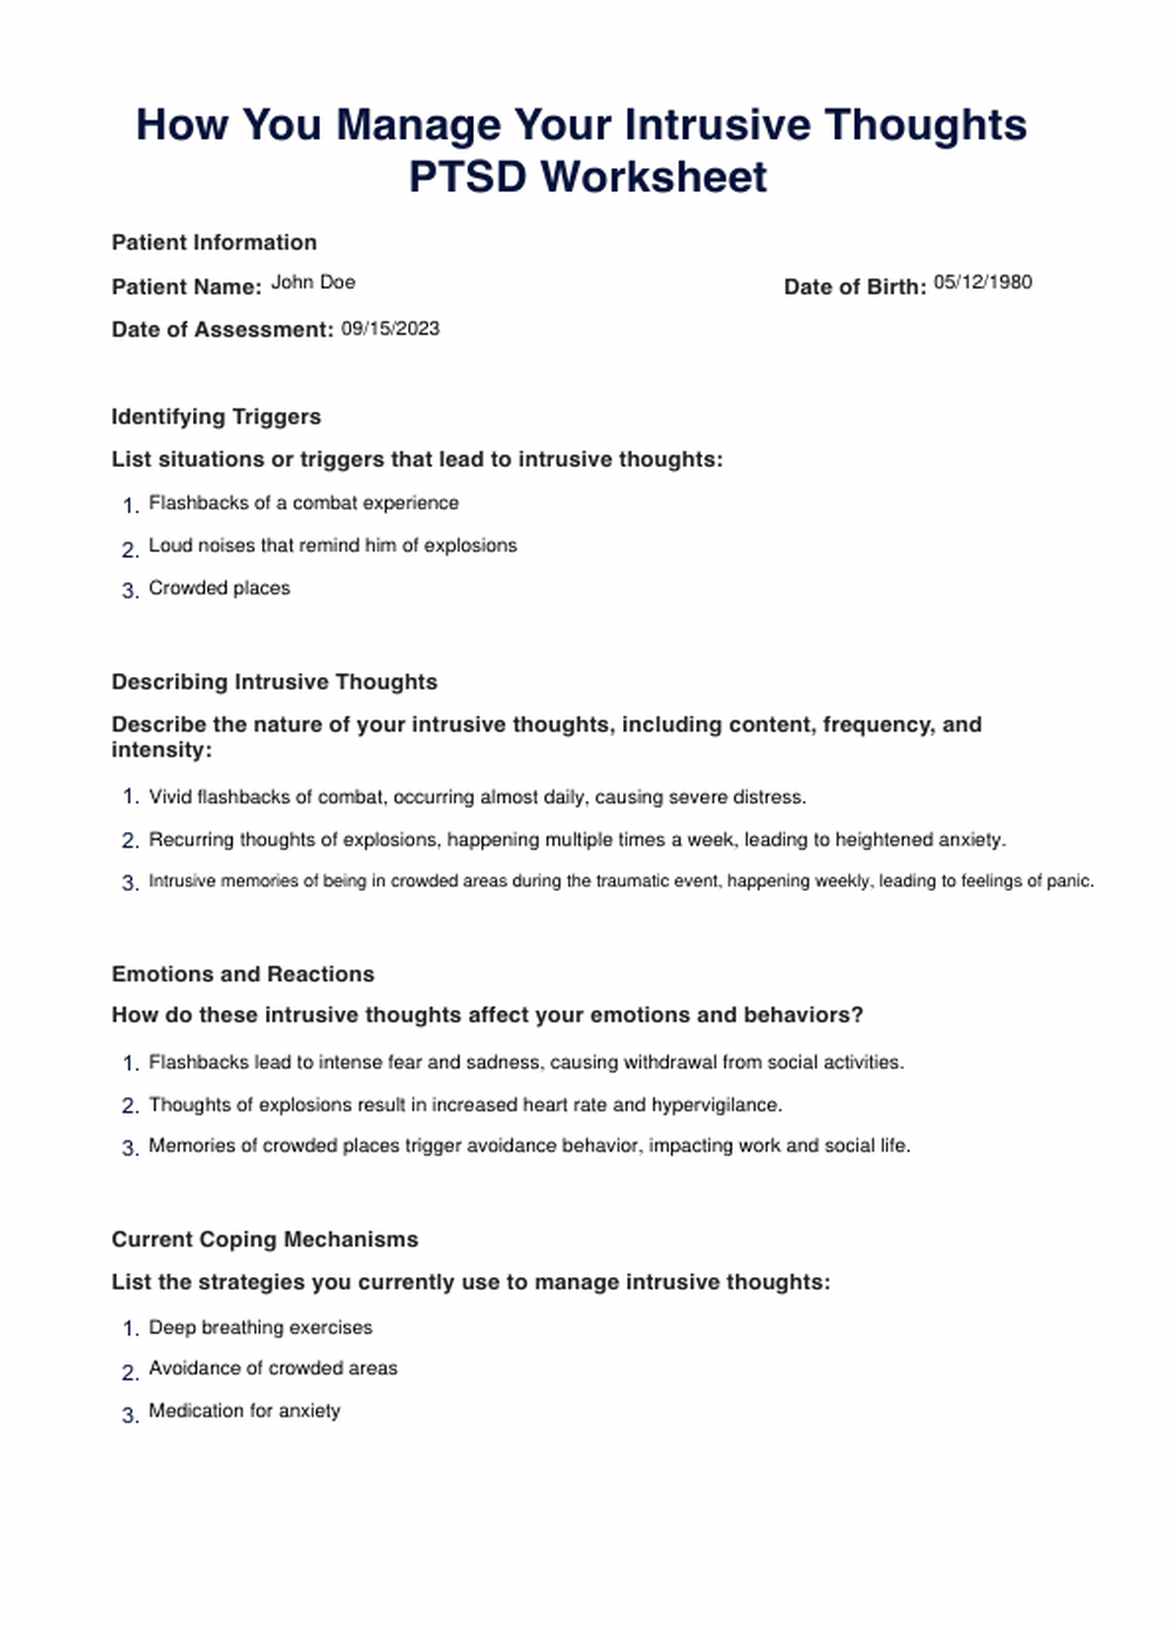 How You Manage Your Intrusive Thoughts PTSD Worksheet PDF Example